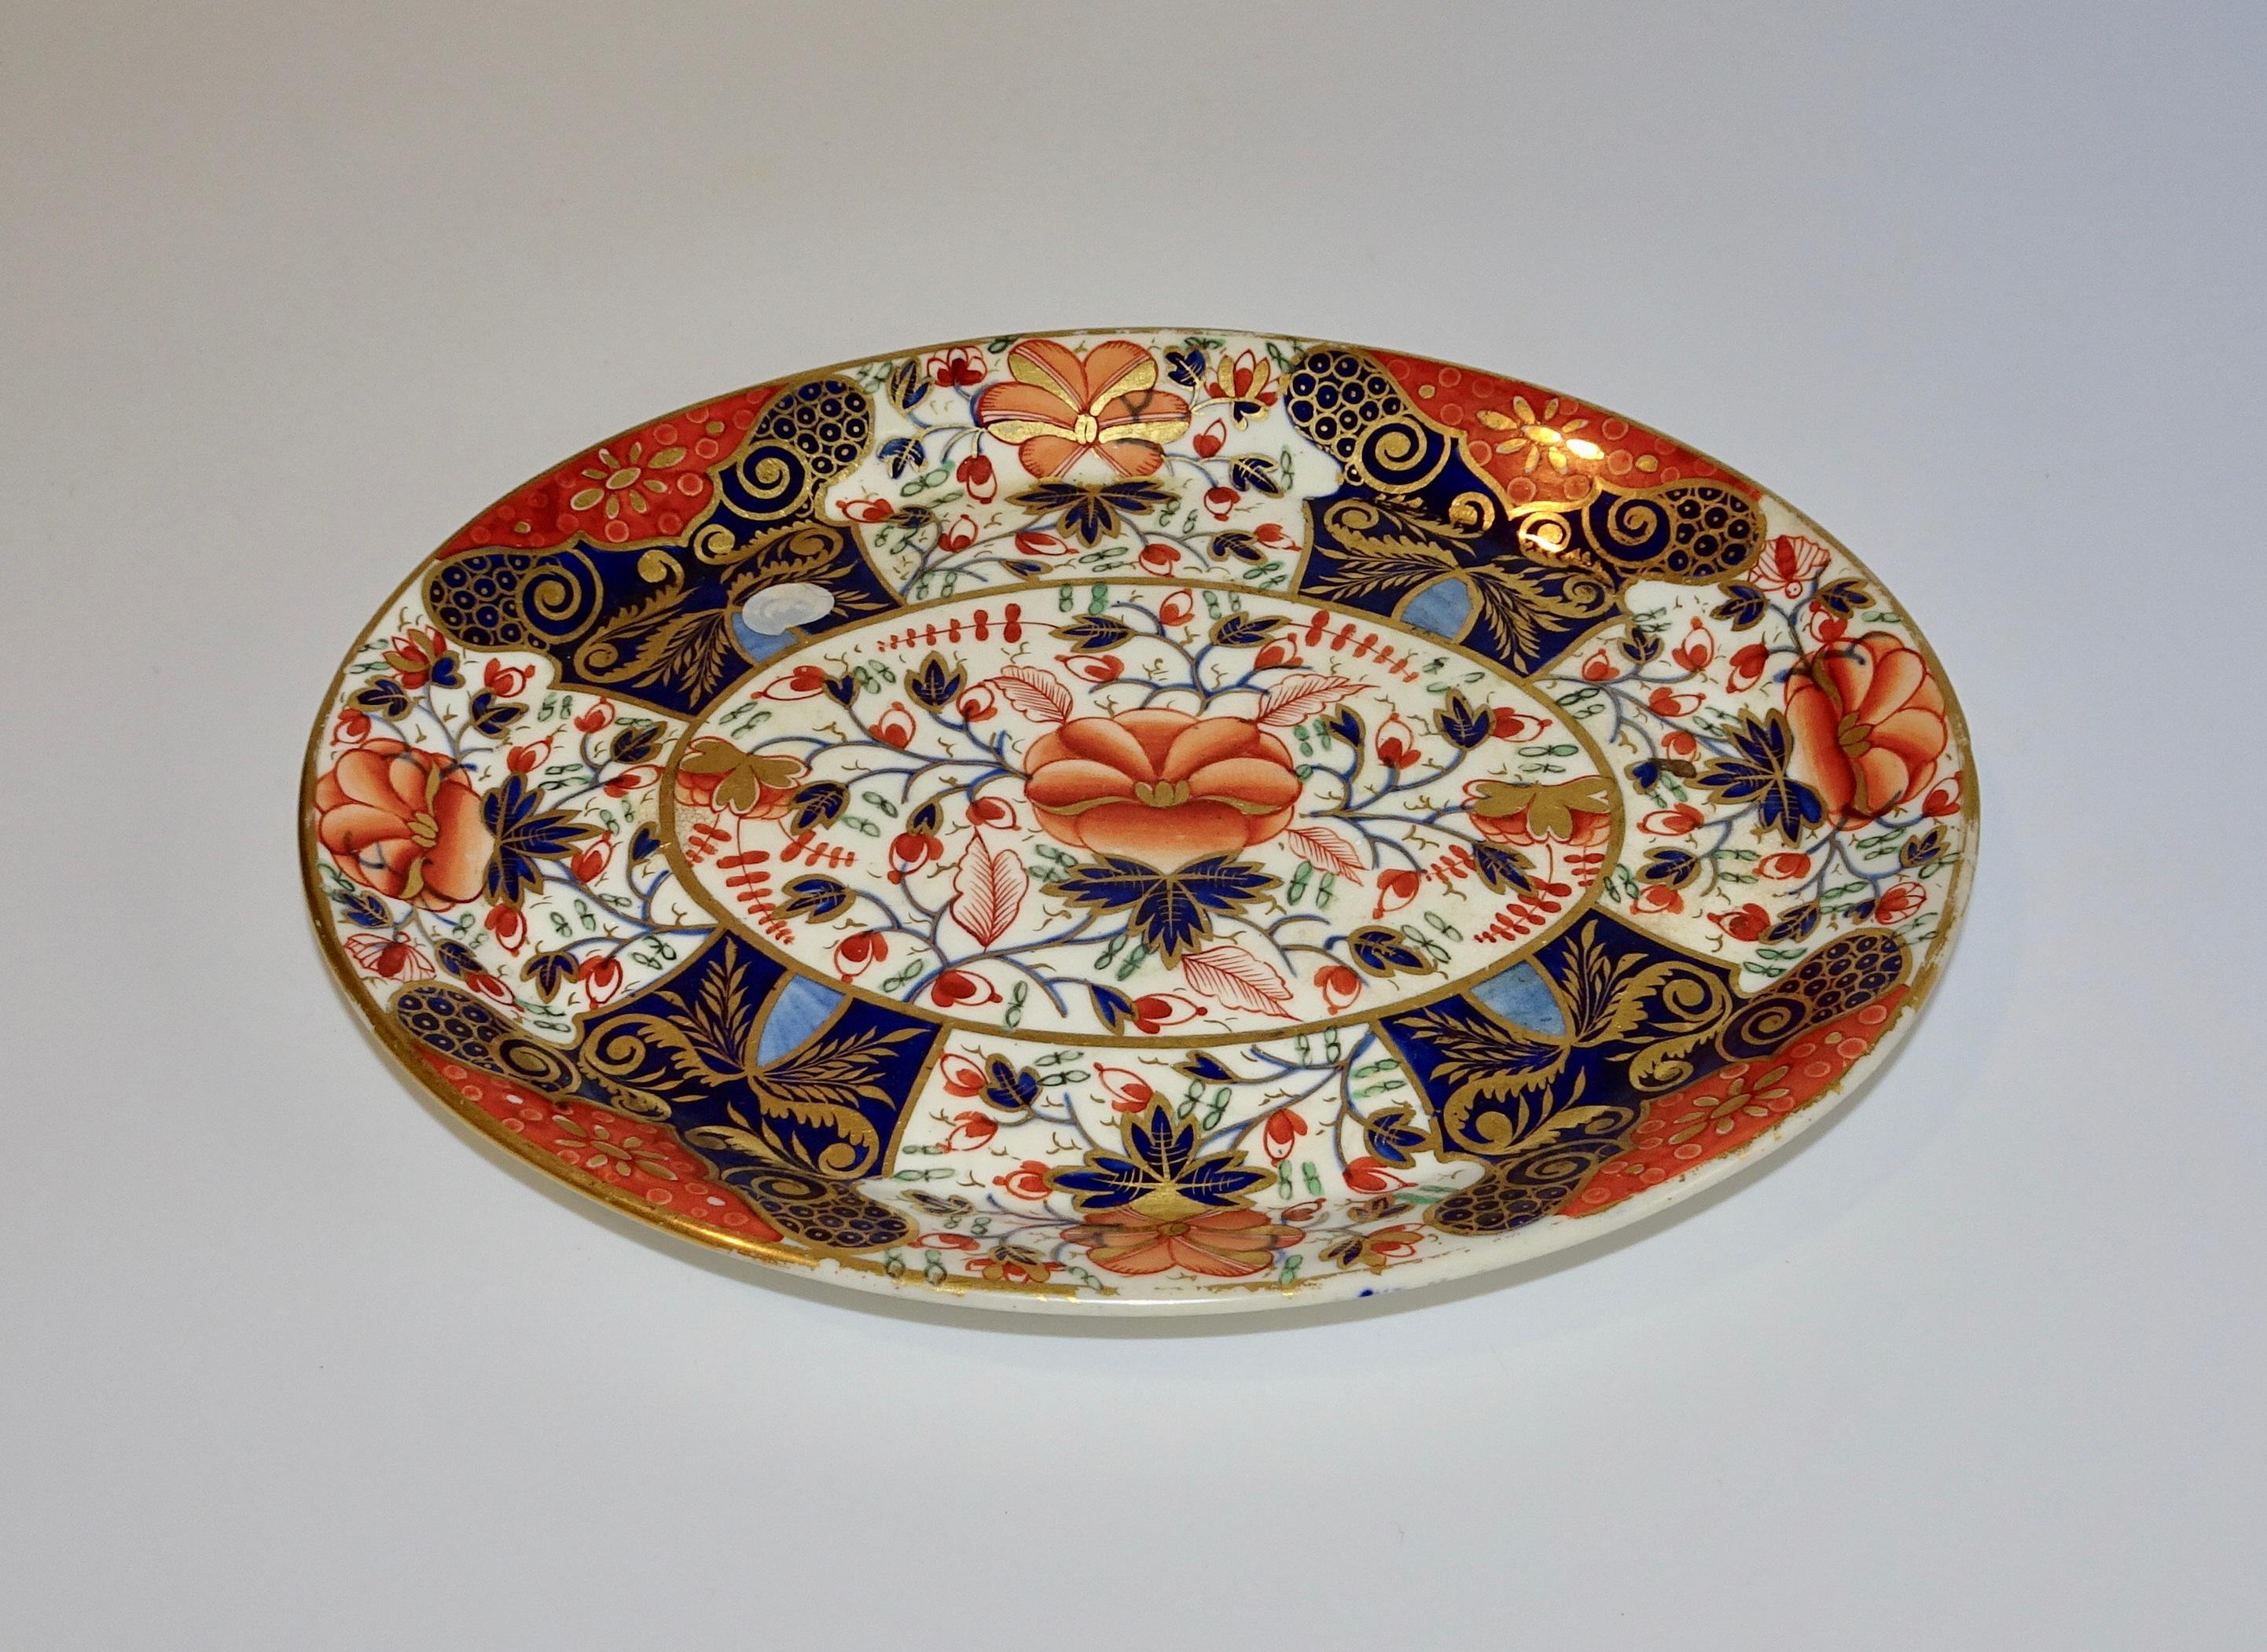 19th century Royal Crown Derby Porcelain Imari plate. The colors are blue, orange and gold.